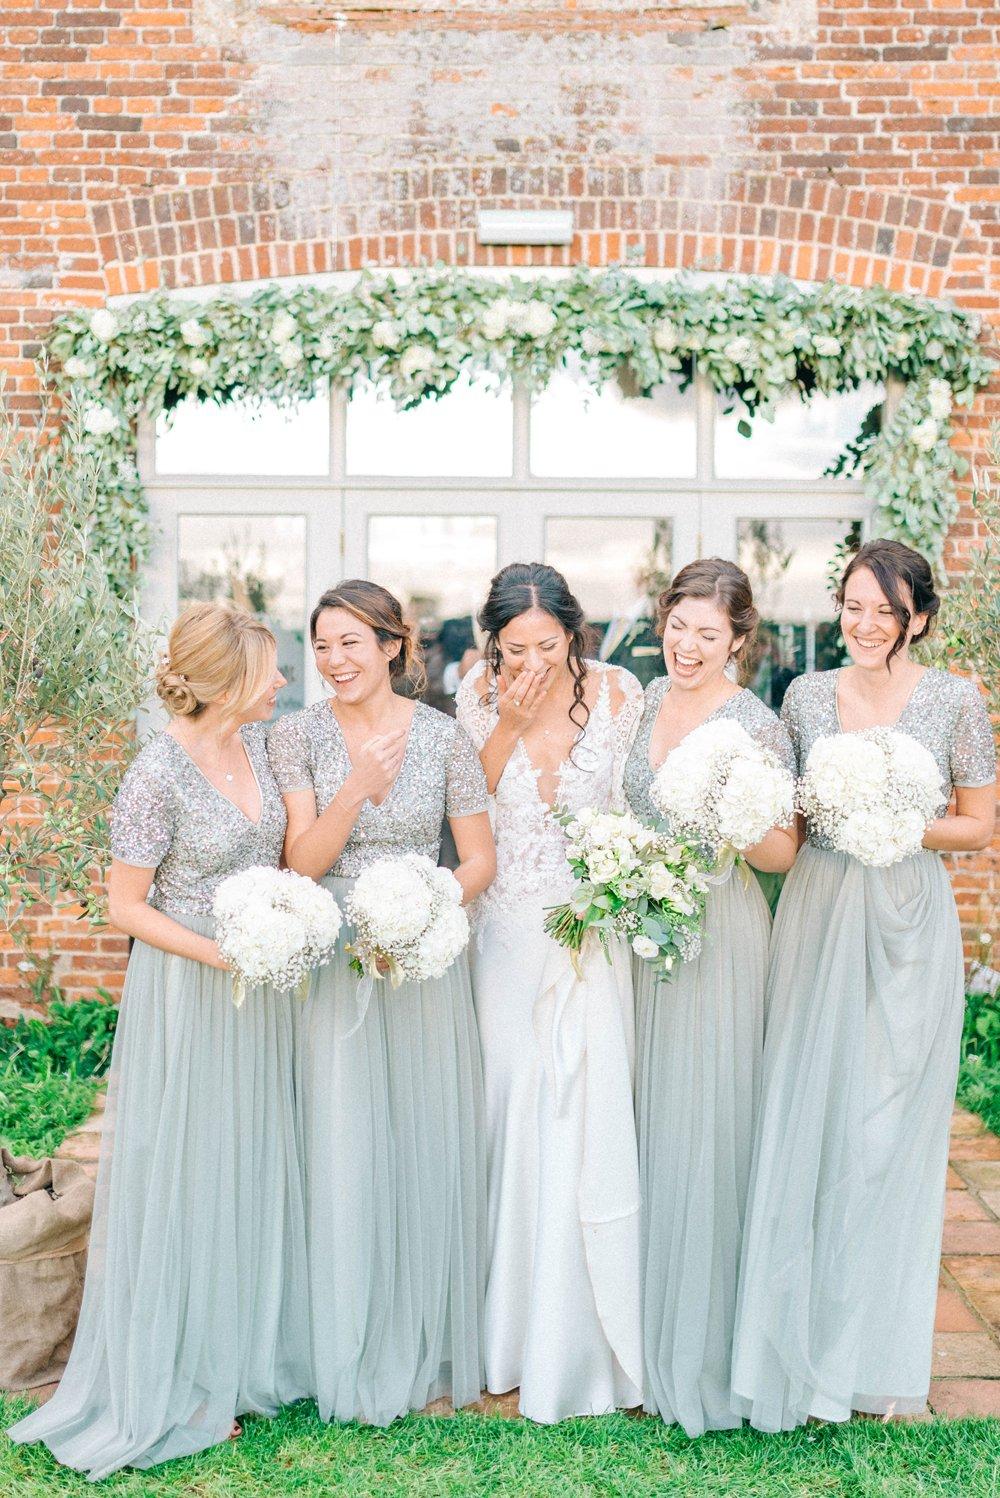 69 of the Prettiest Spring Wedding Ideas for 2021 